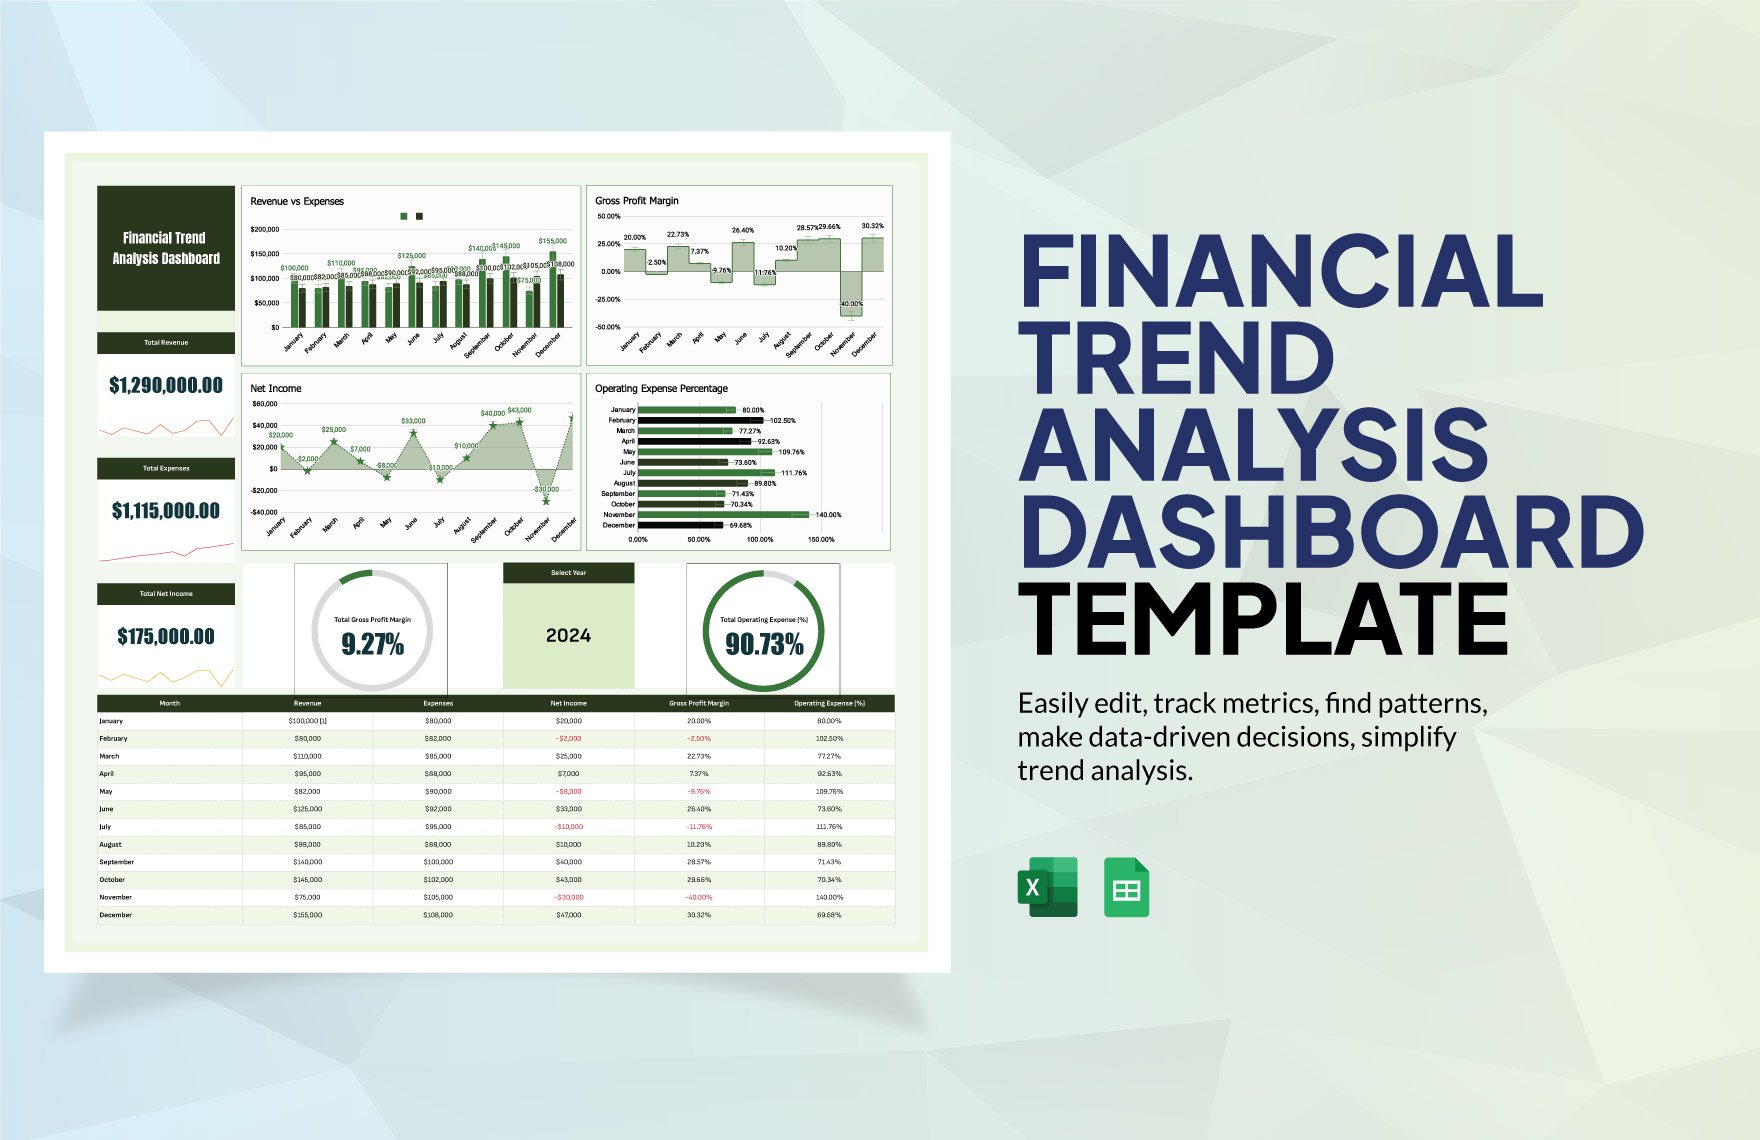 Financial Trend Analysis Dashboard Template